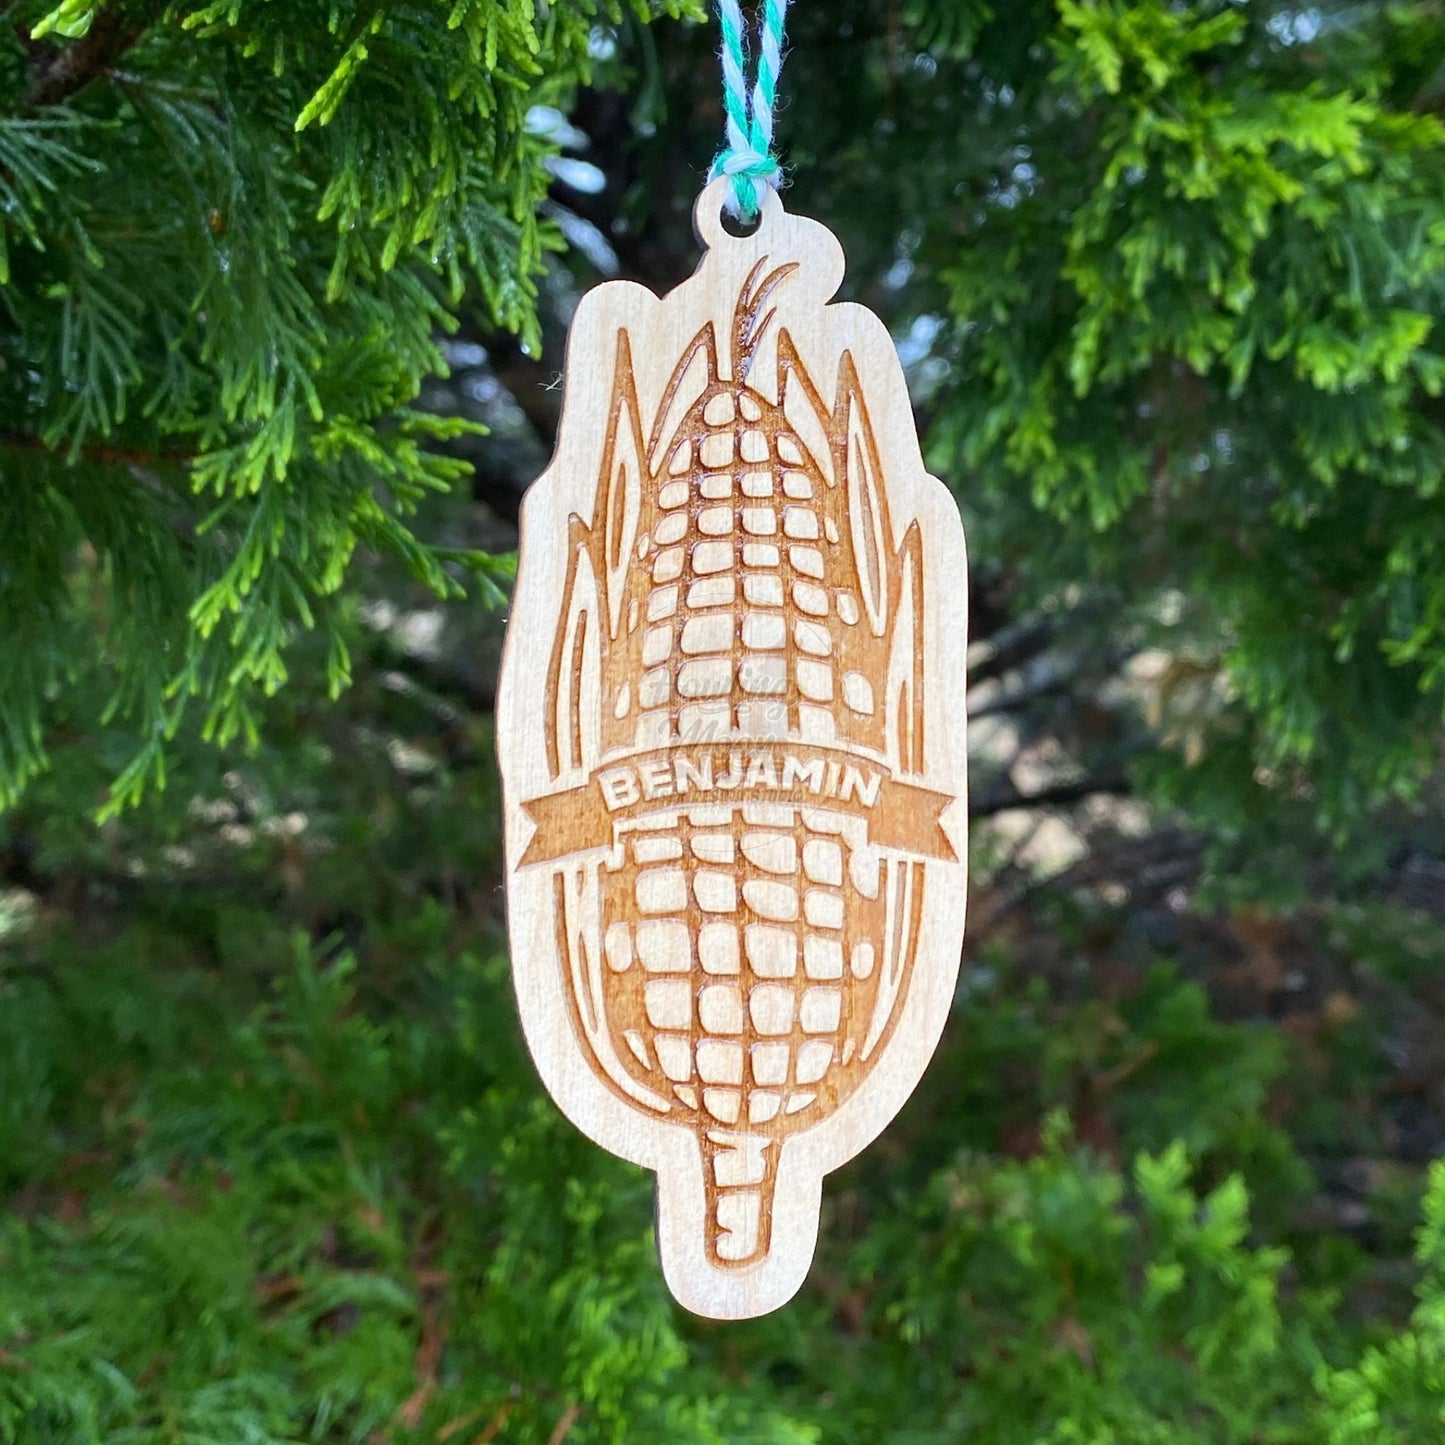 Personalized Sweet Corn Ornament from Howling Moon Laser Design features hand drawn ear of corn and twine ribbon for hanging